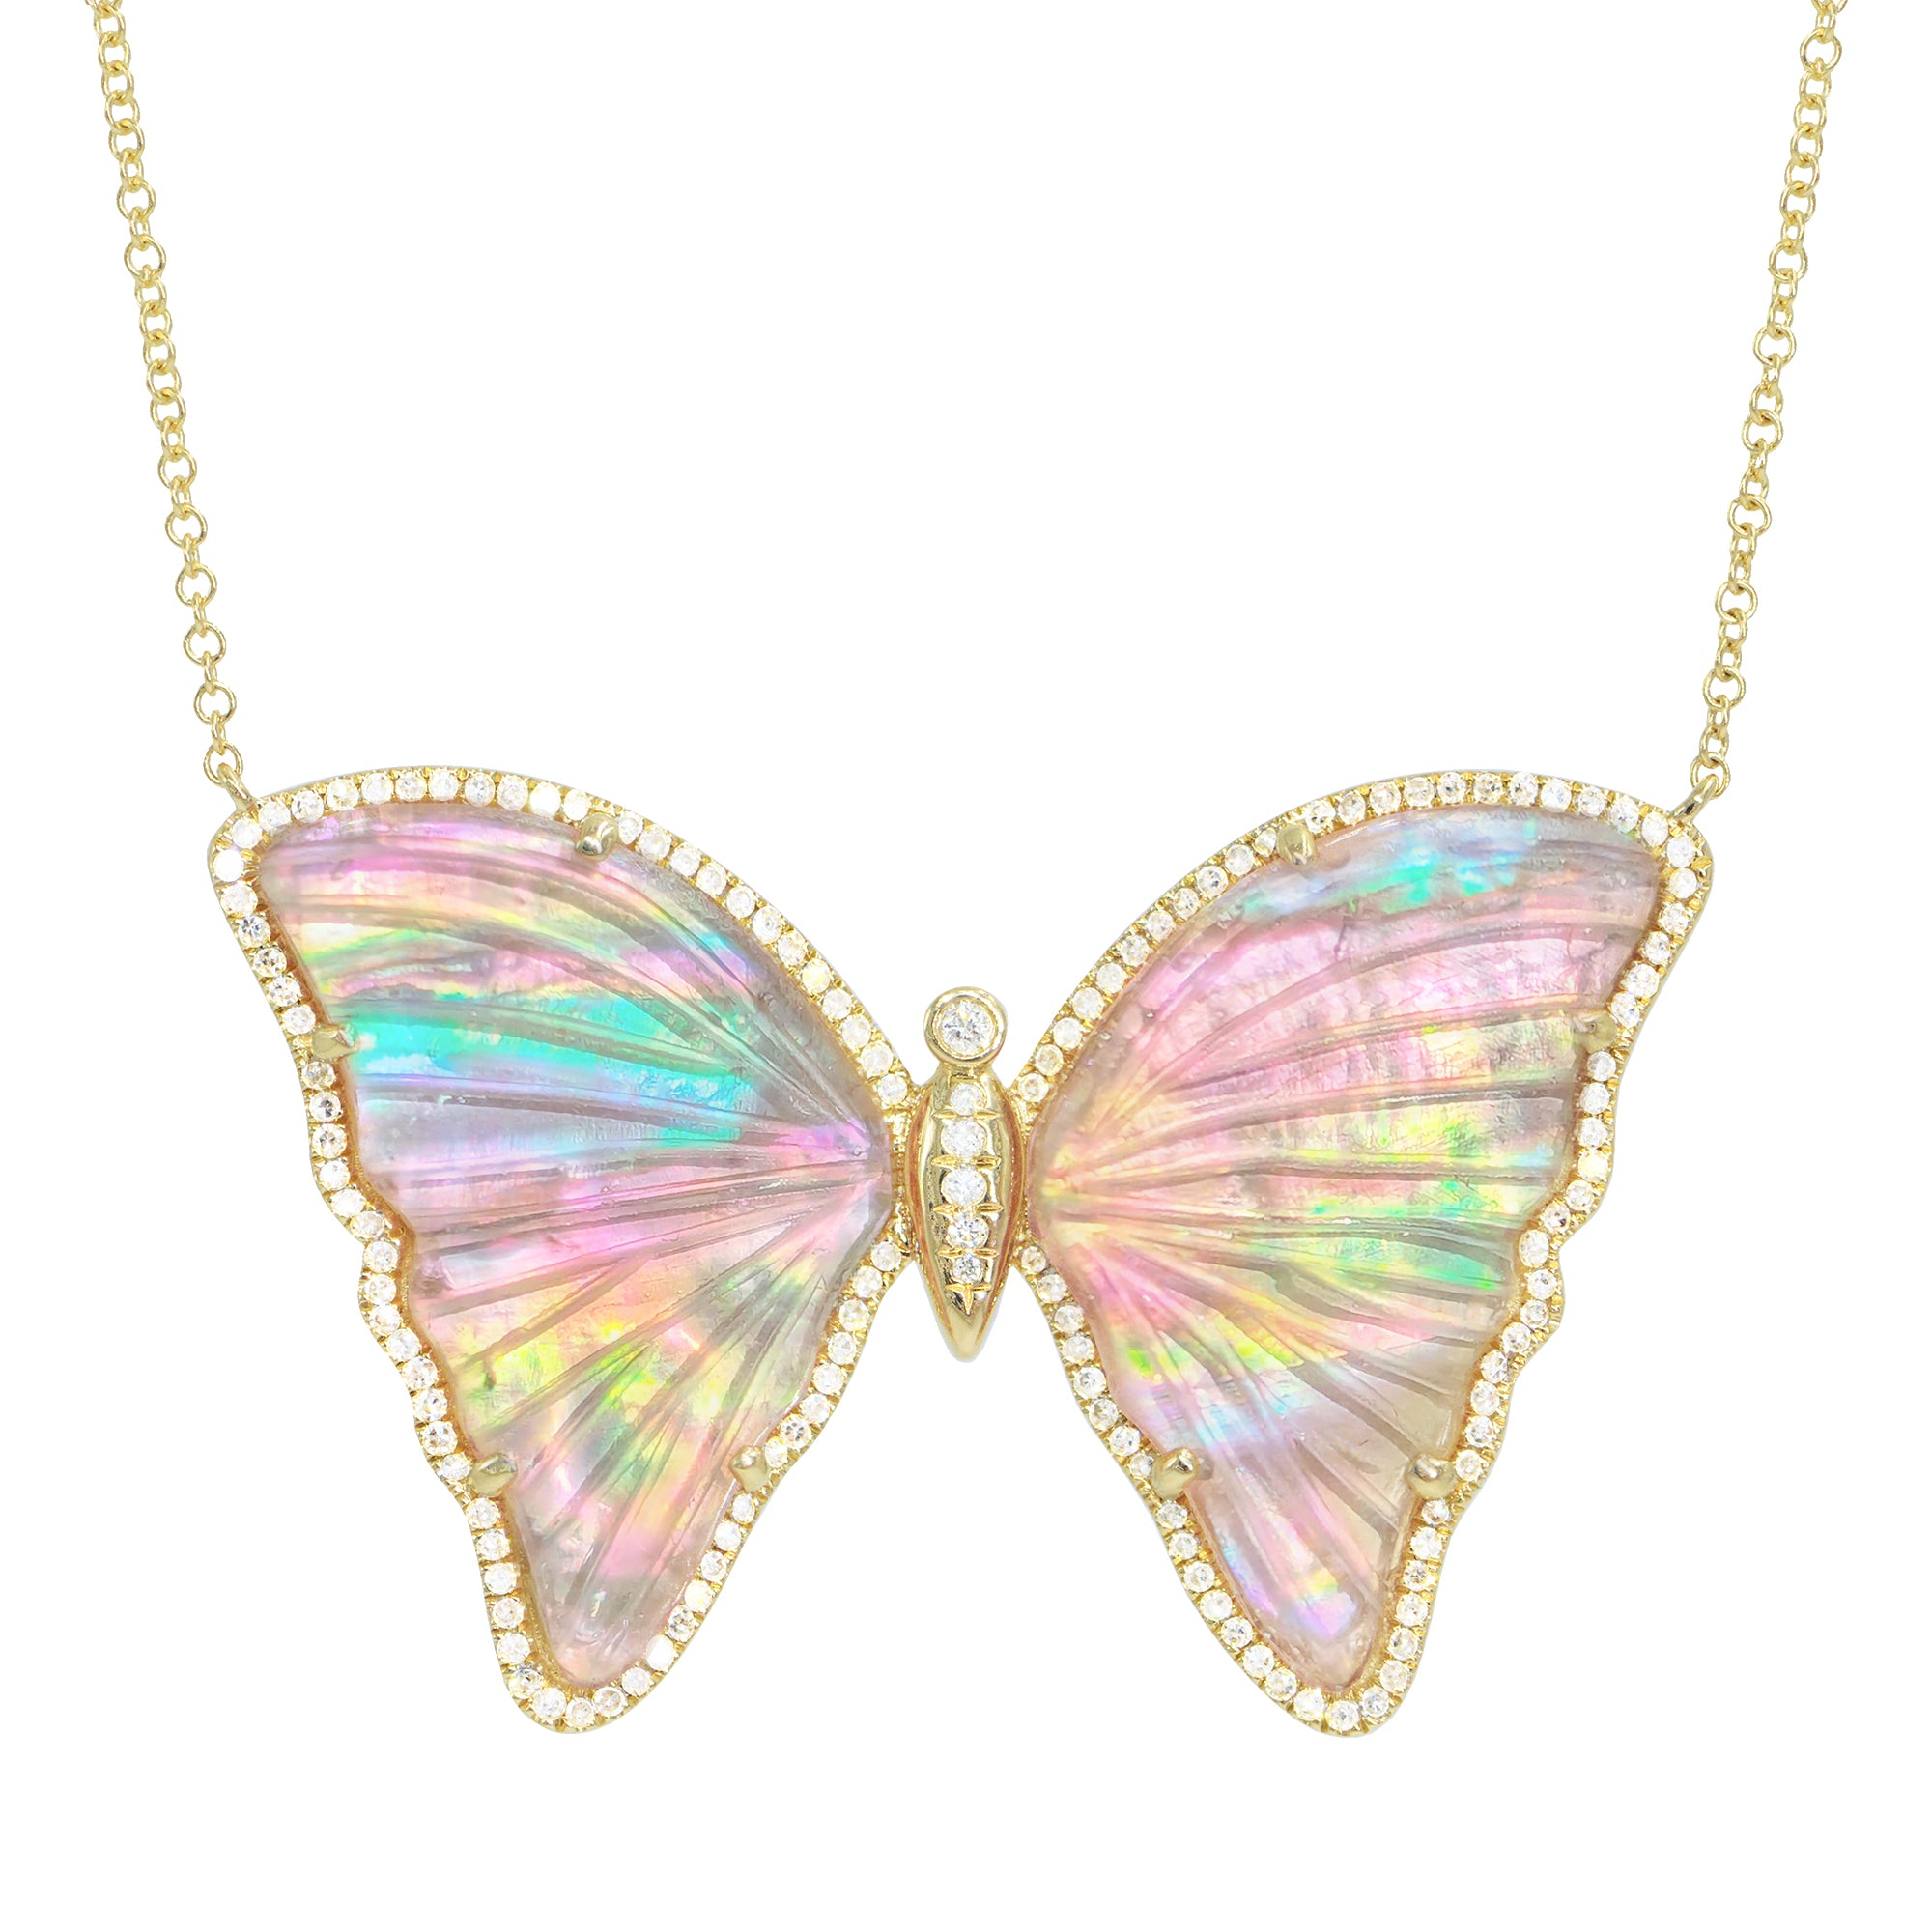 large pink and pearl tourmaline butterfly necklace with damonds